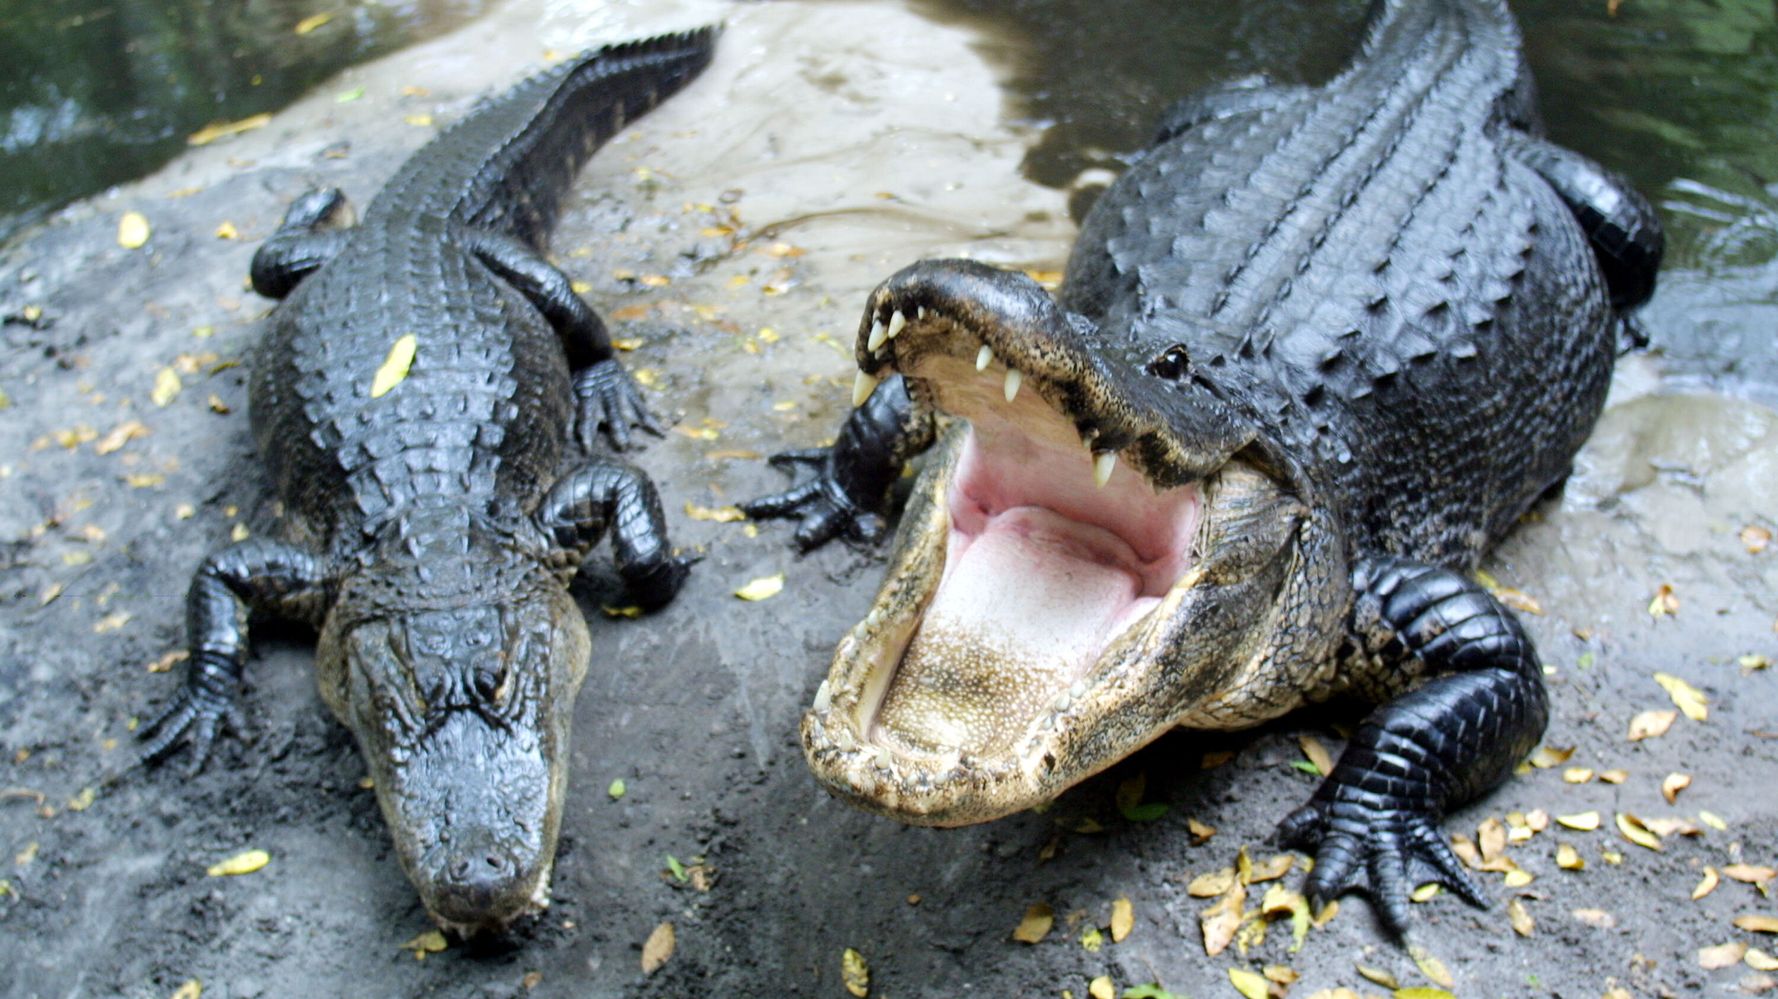 Alligator Handler Recovering After Terrifying Attack, Daring Rescue